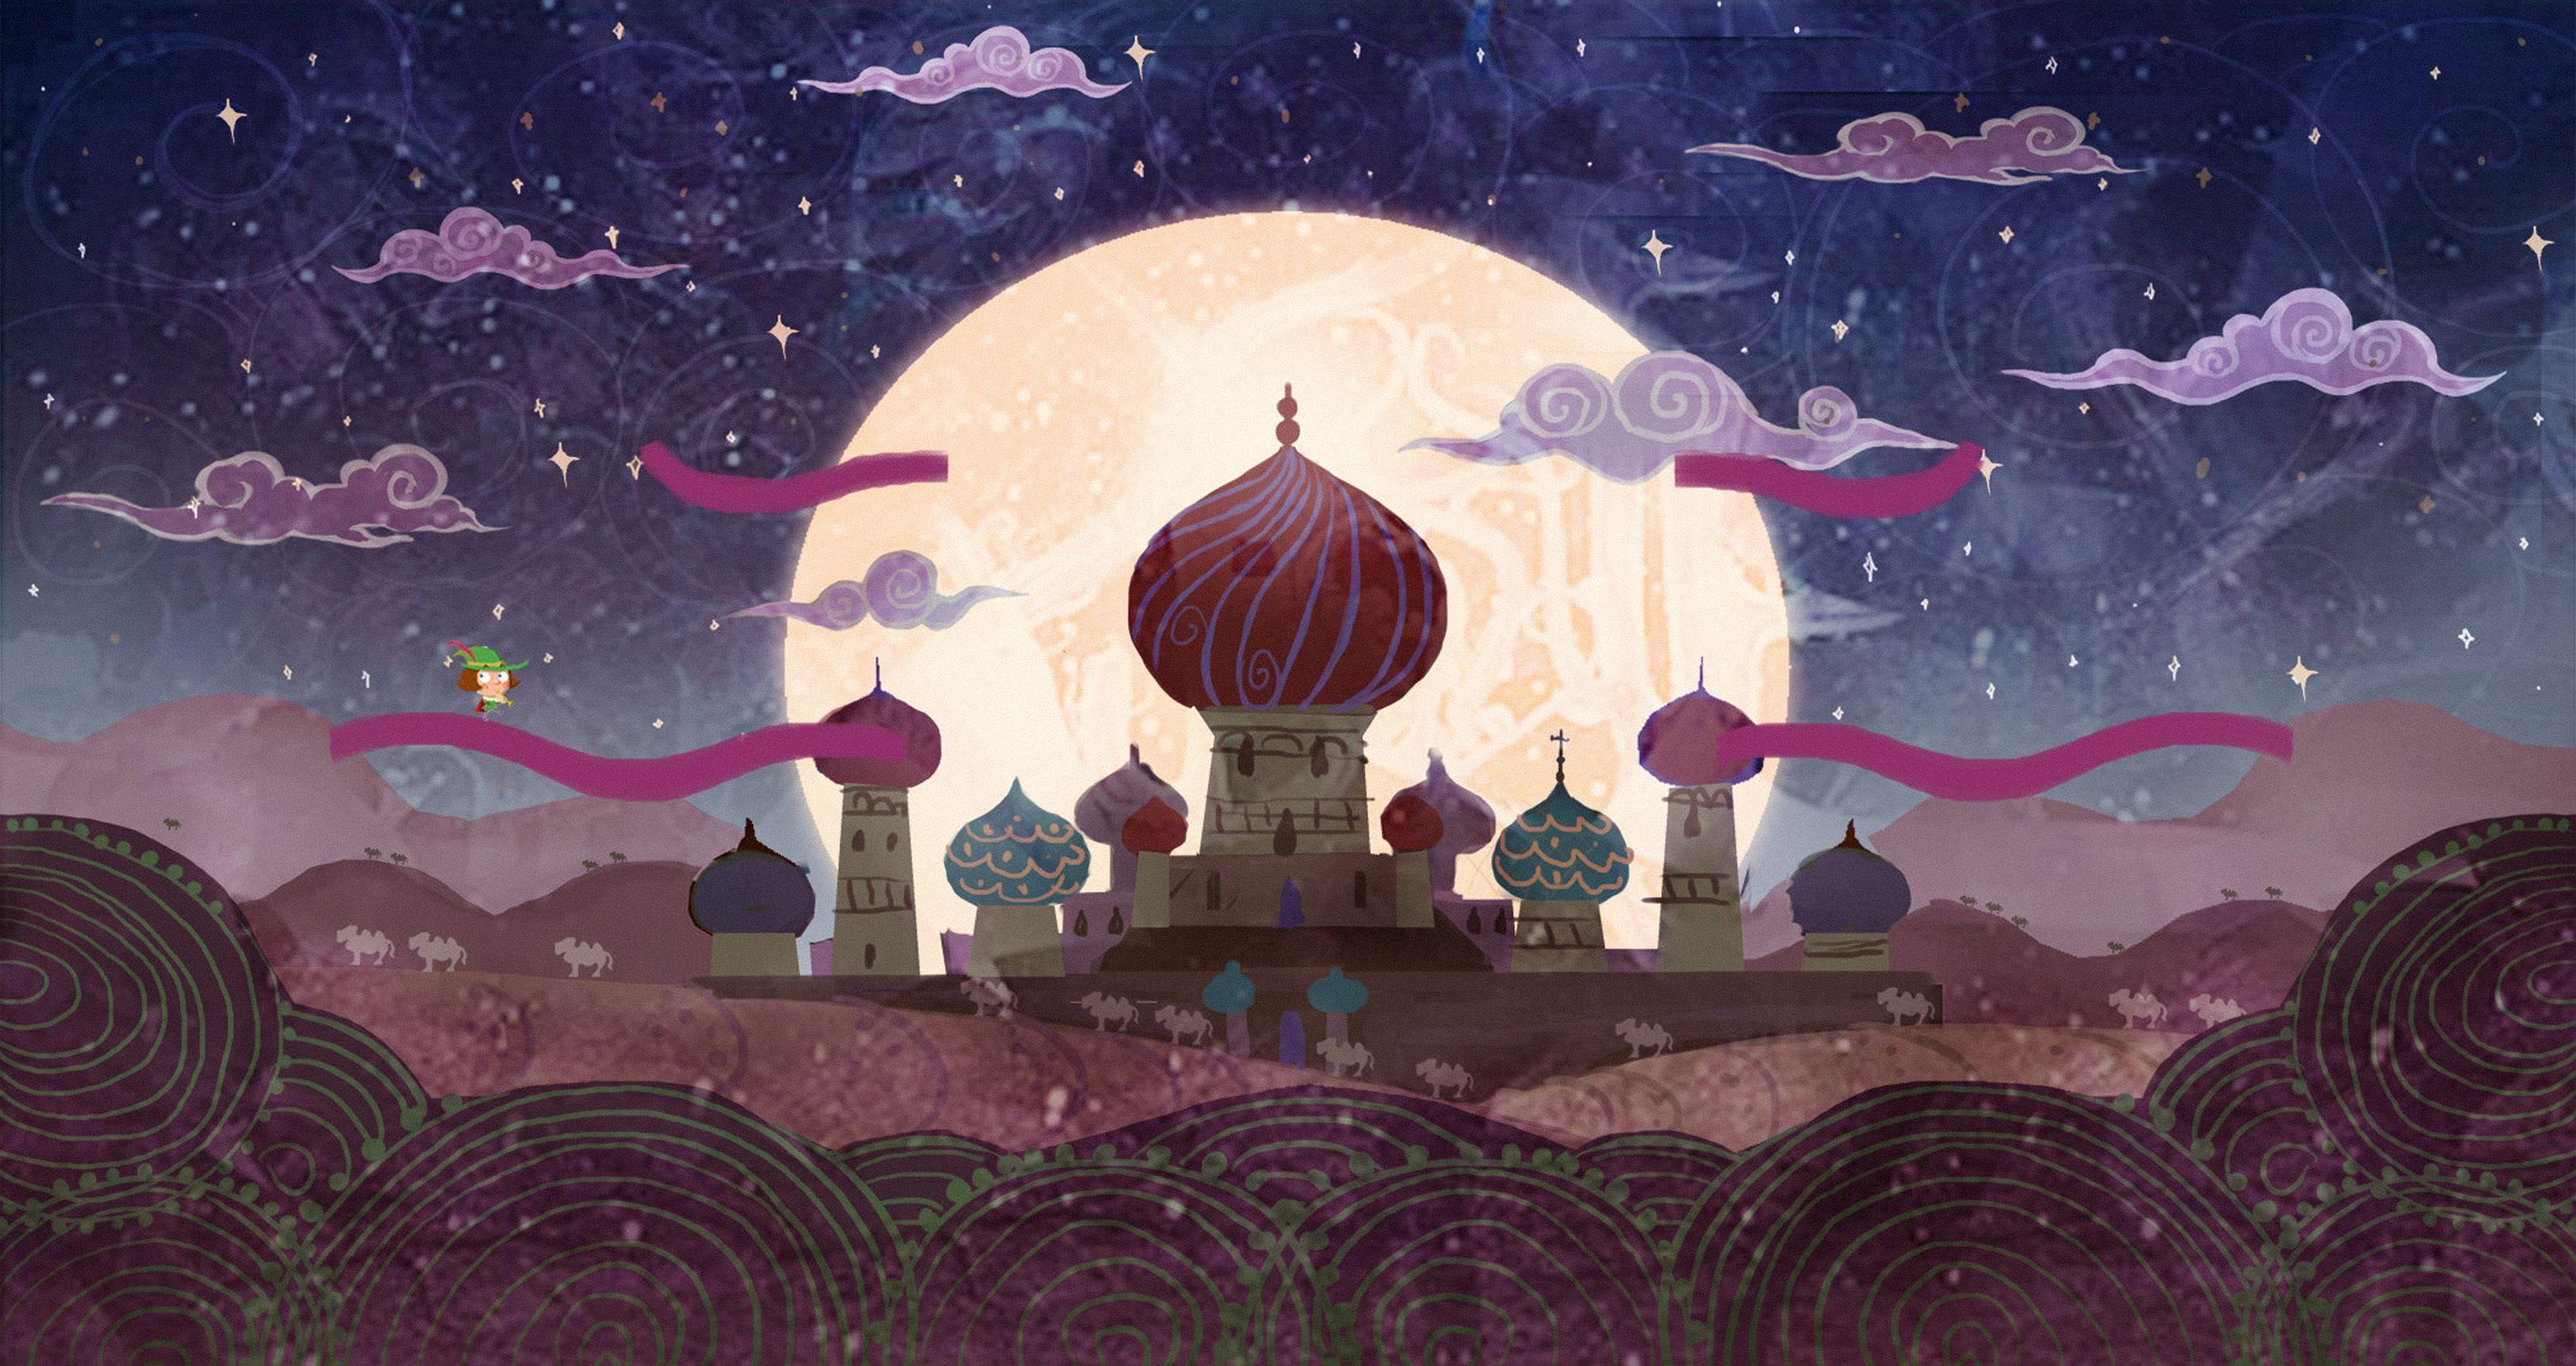 Check it out!. Night illustration, Arabian nights stories